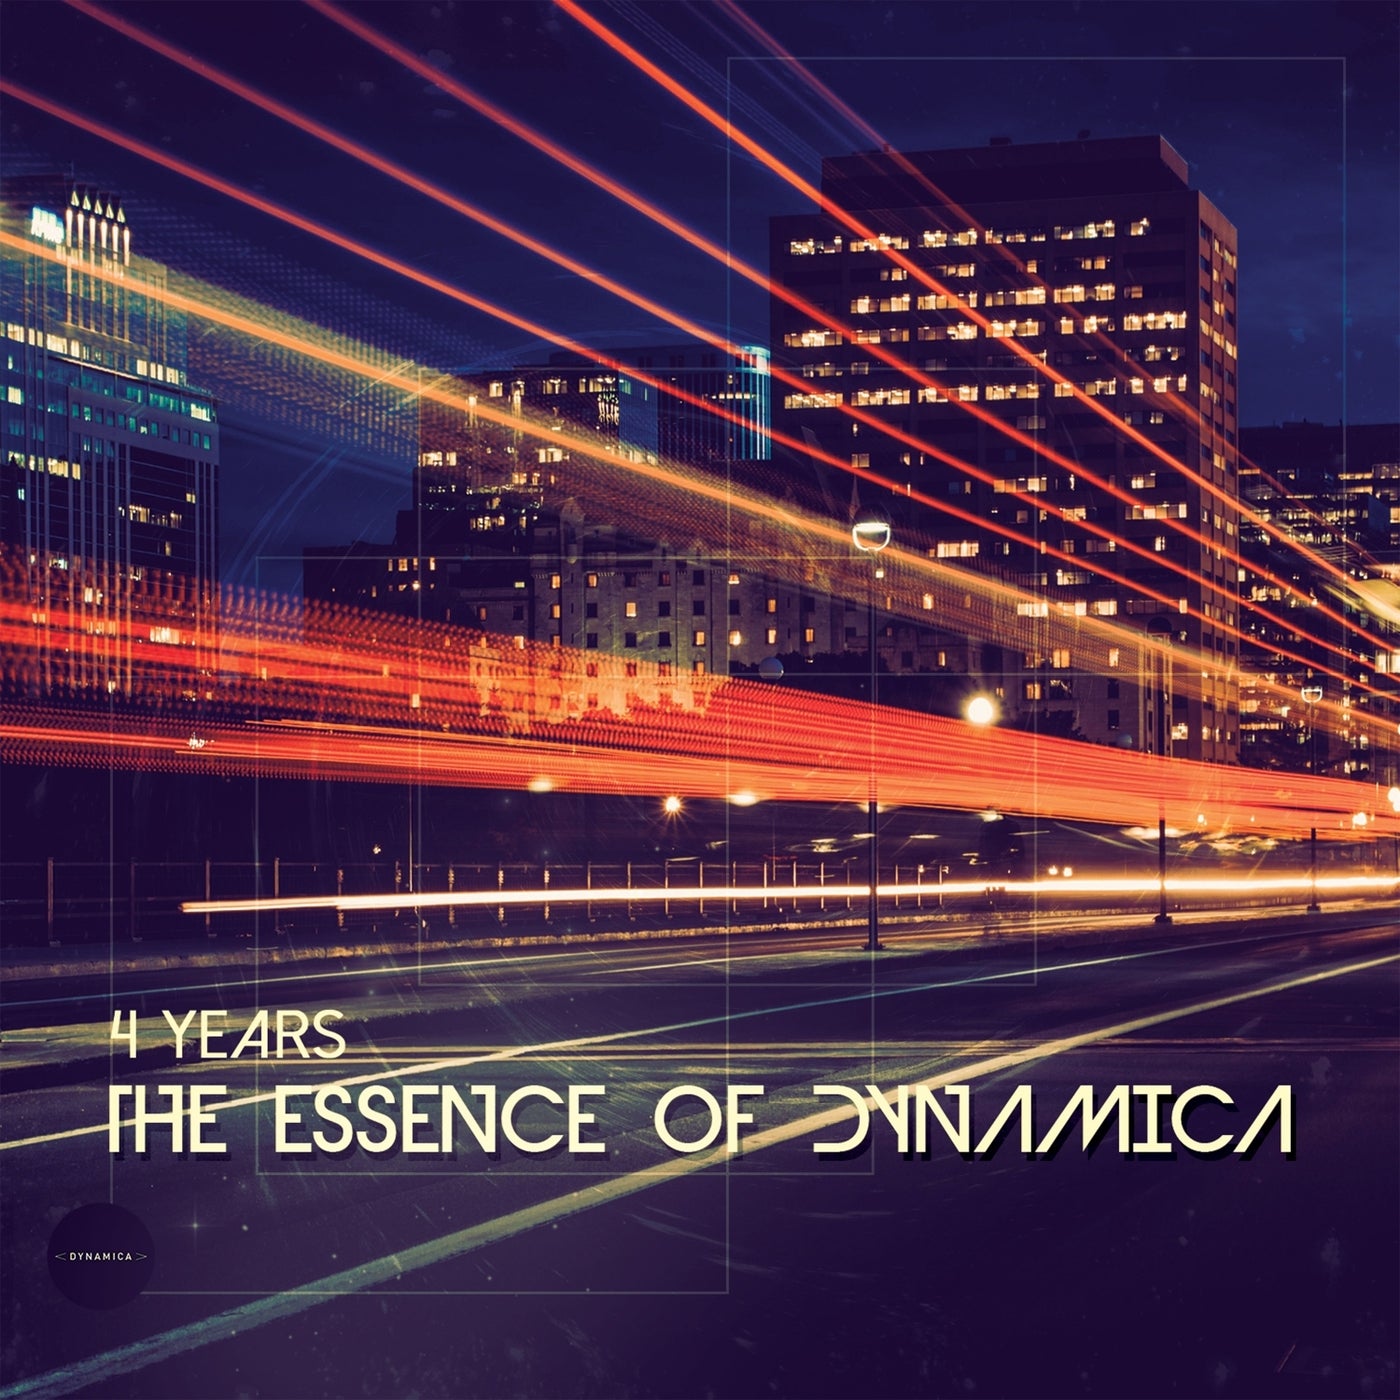 4 Years - The Essence of Dynamica